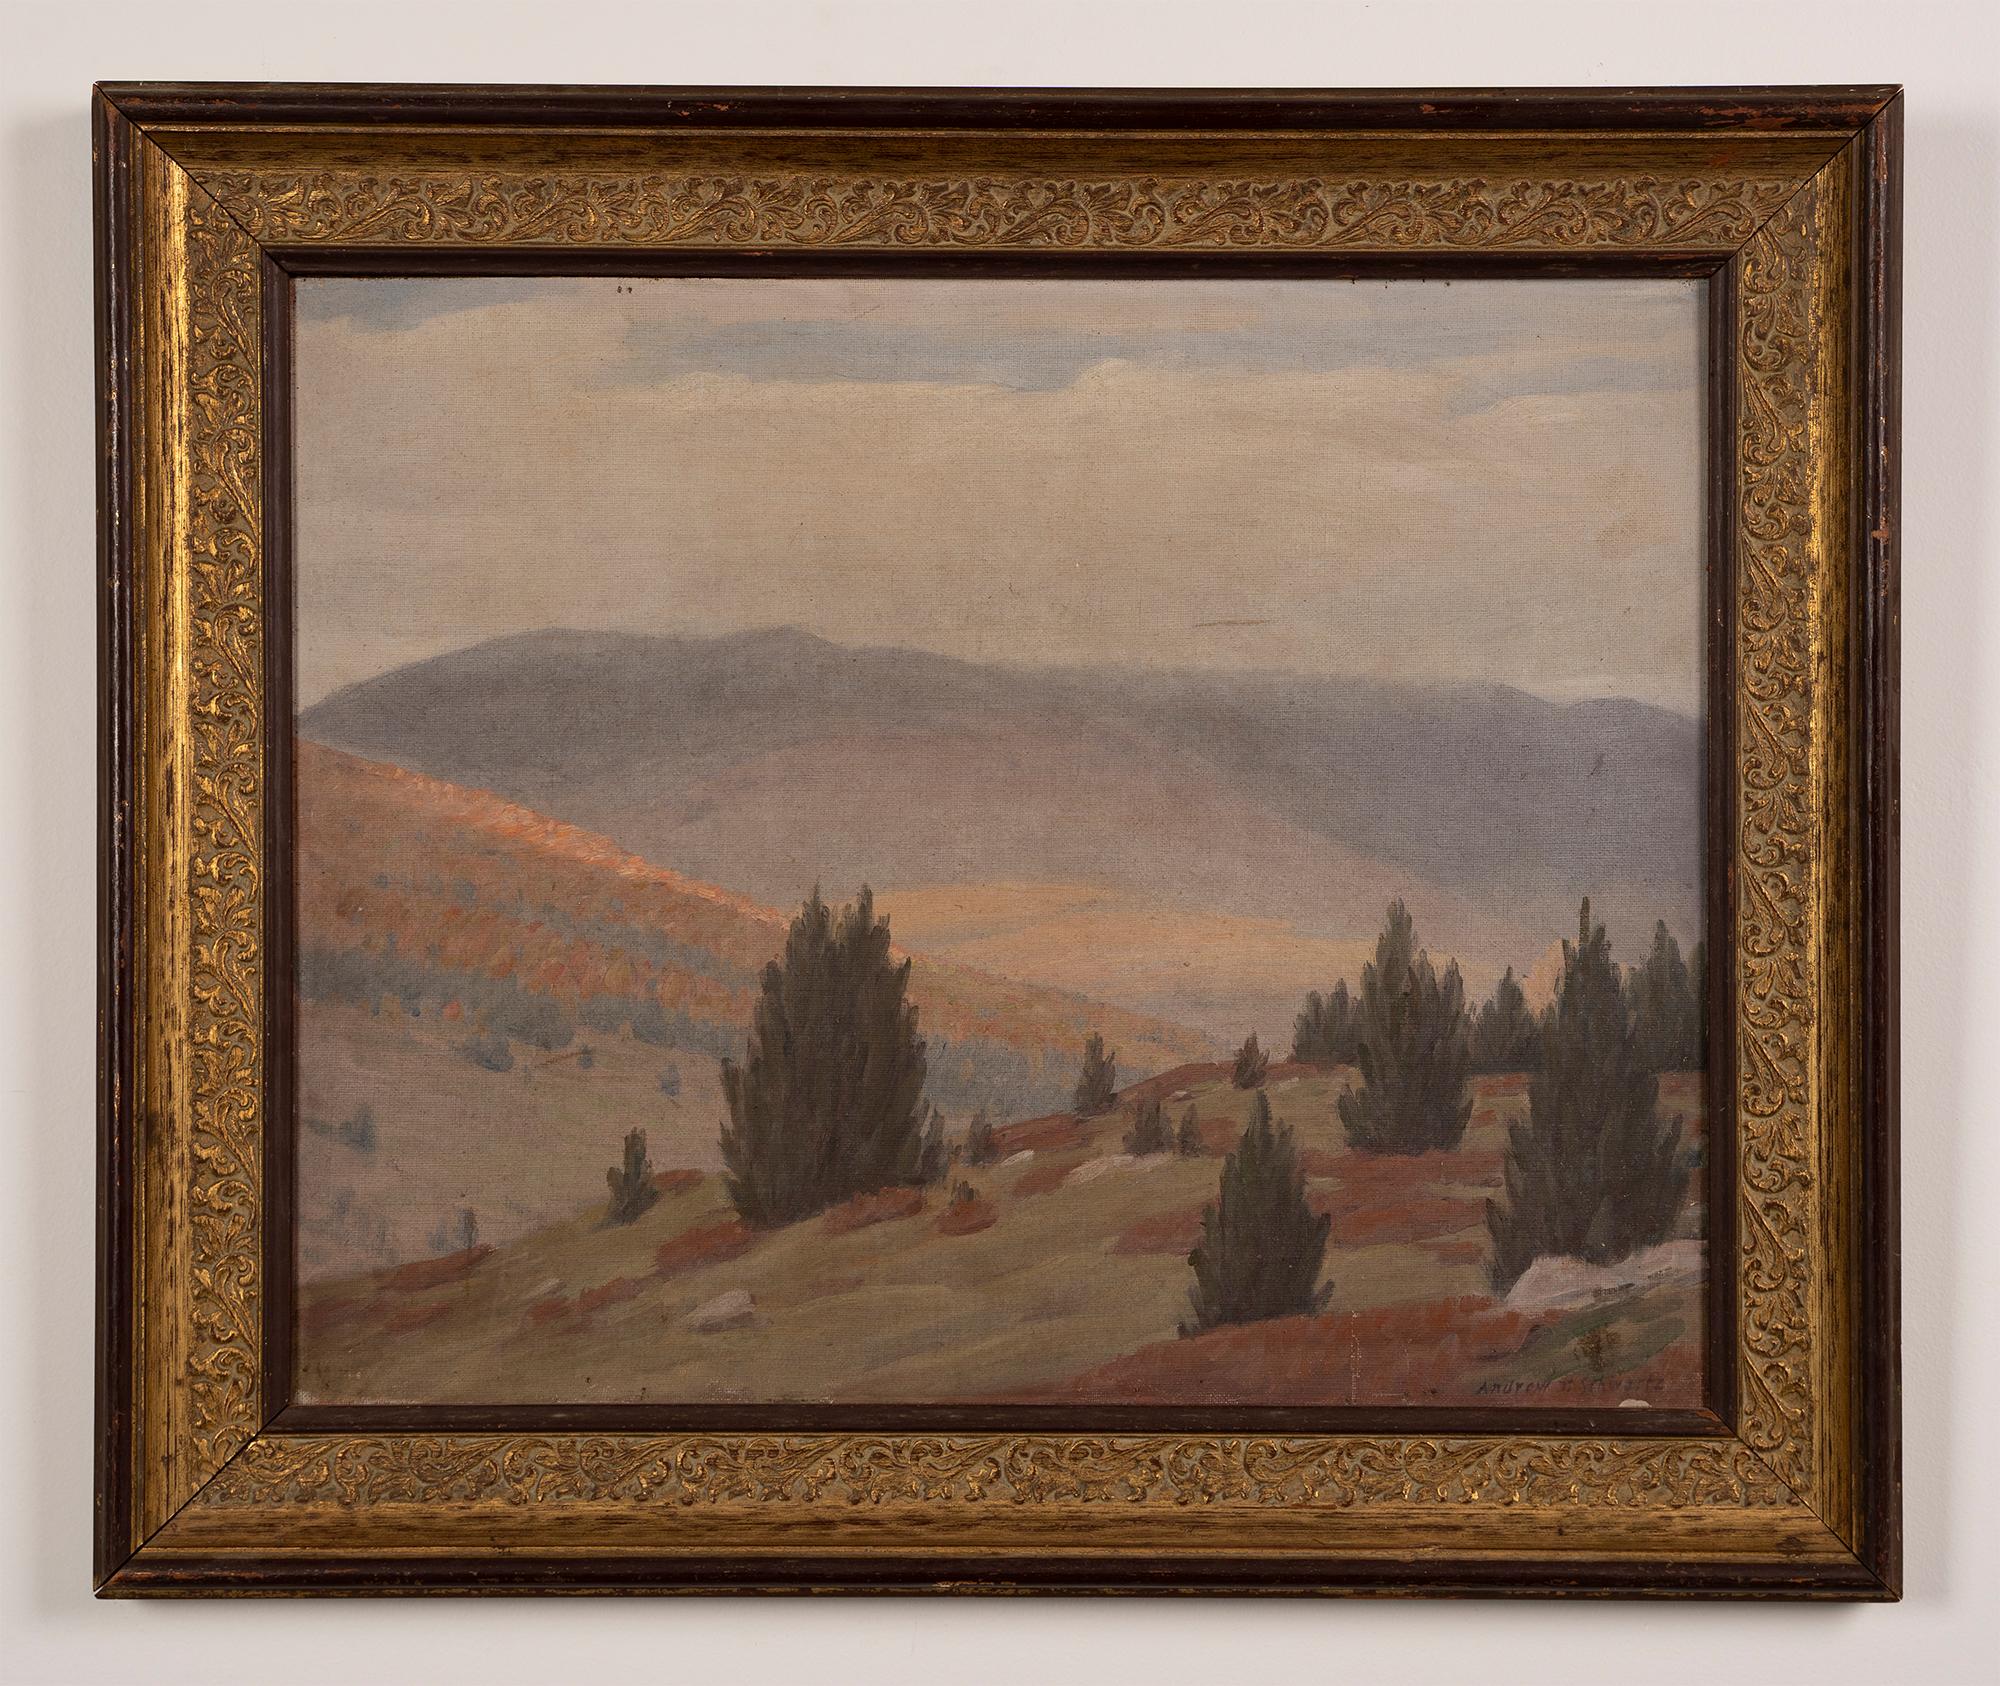 Antique original landscape oil painting by Andrew Thomas Schwartz (1867 - 1942) .  Oil on canvas, circa 1920.  Signed.  Image size, 20L x 16H.  Framed.
